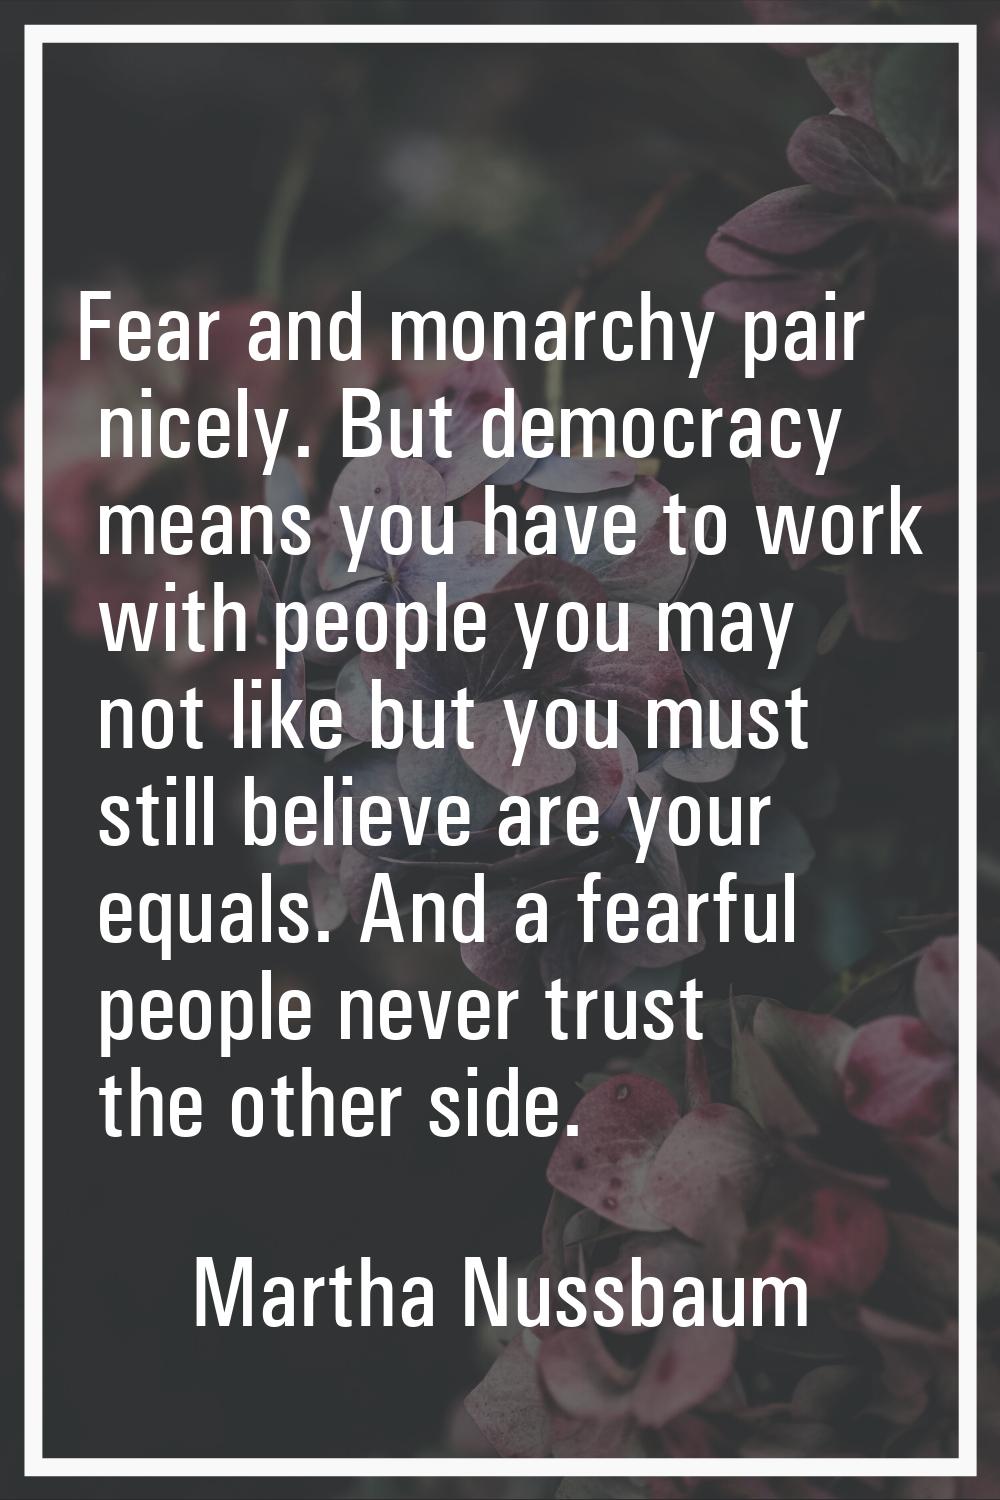 Fear and monarchy pair nicely. But democracy means you have to work with people you may not like bu